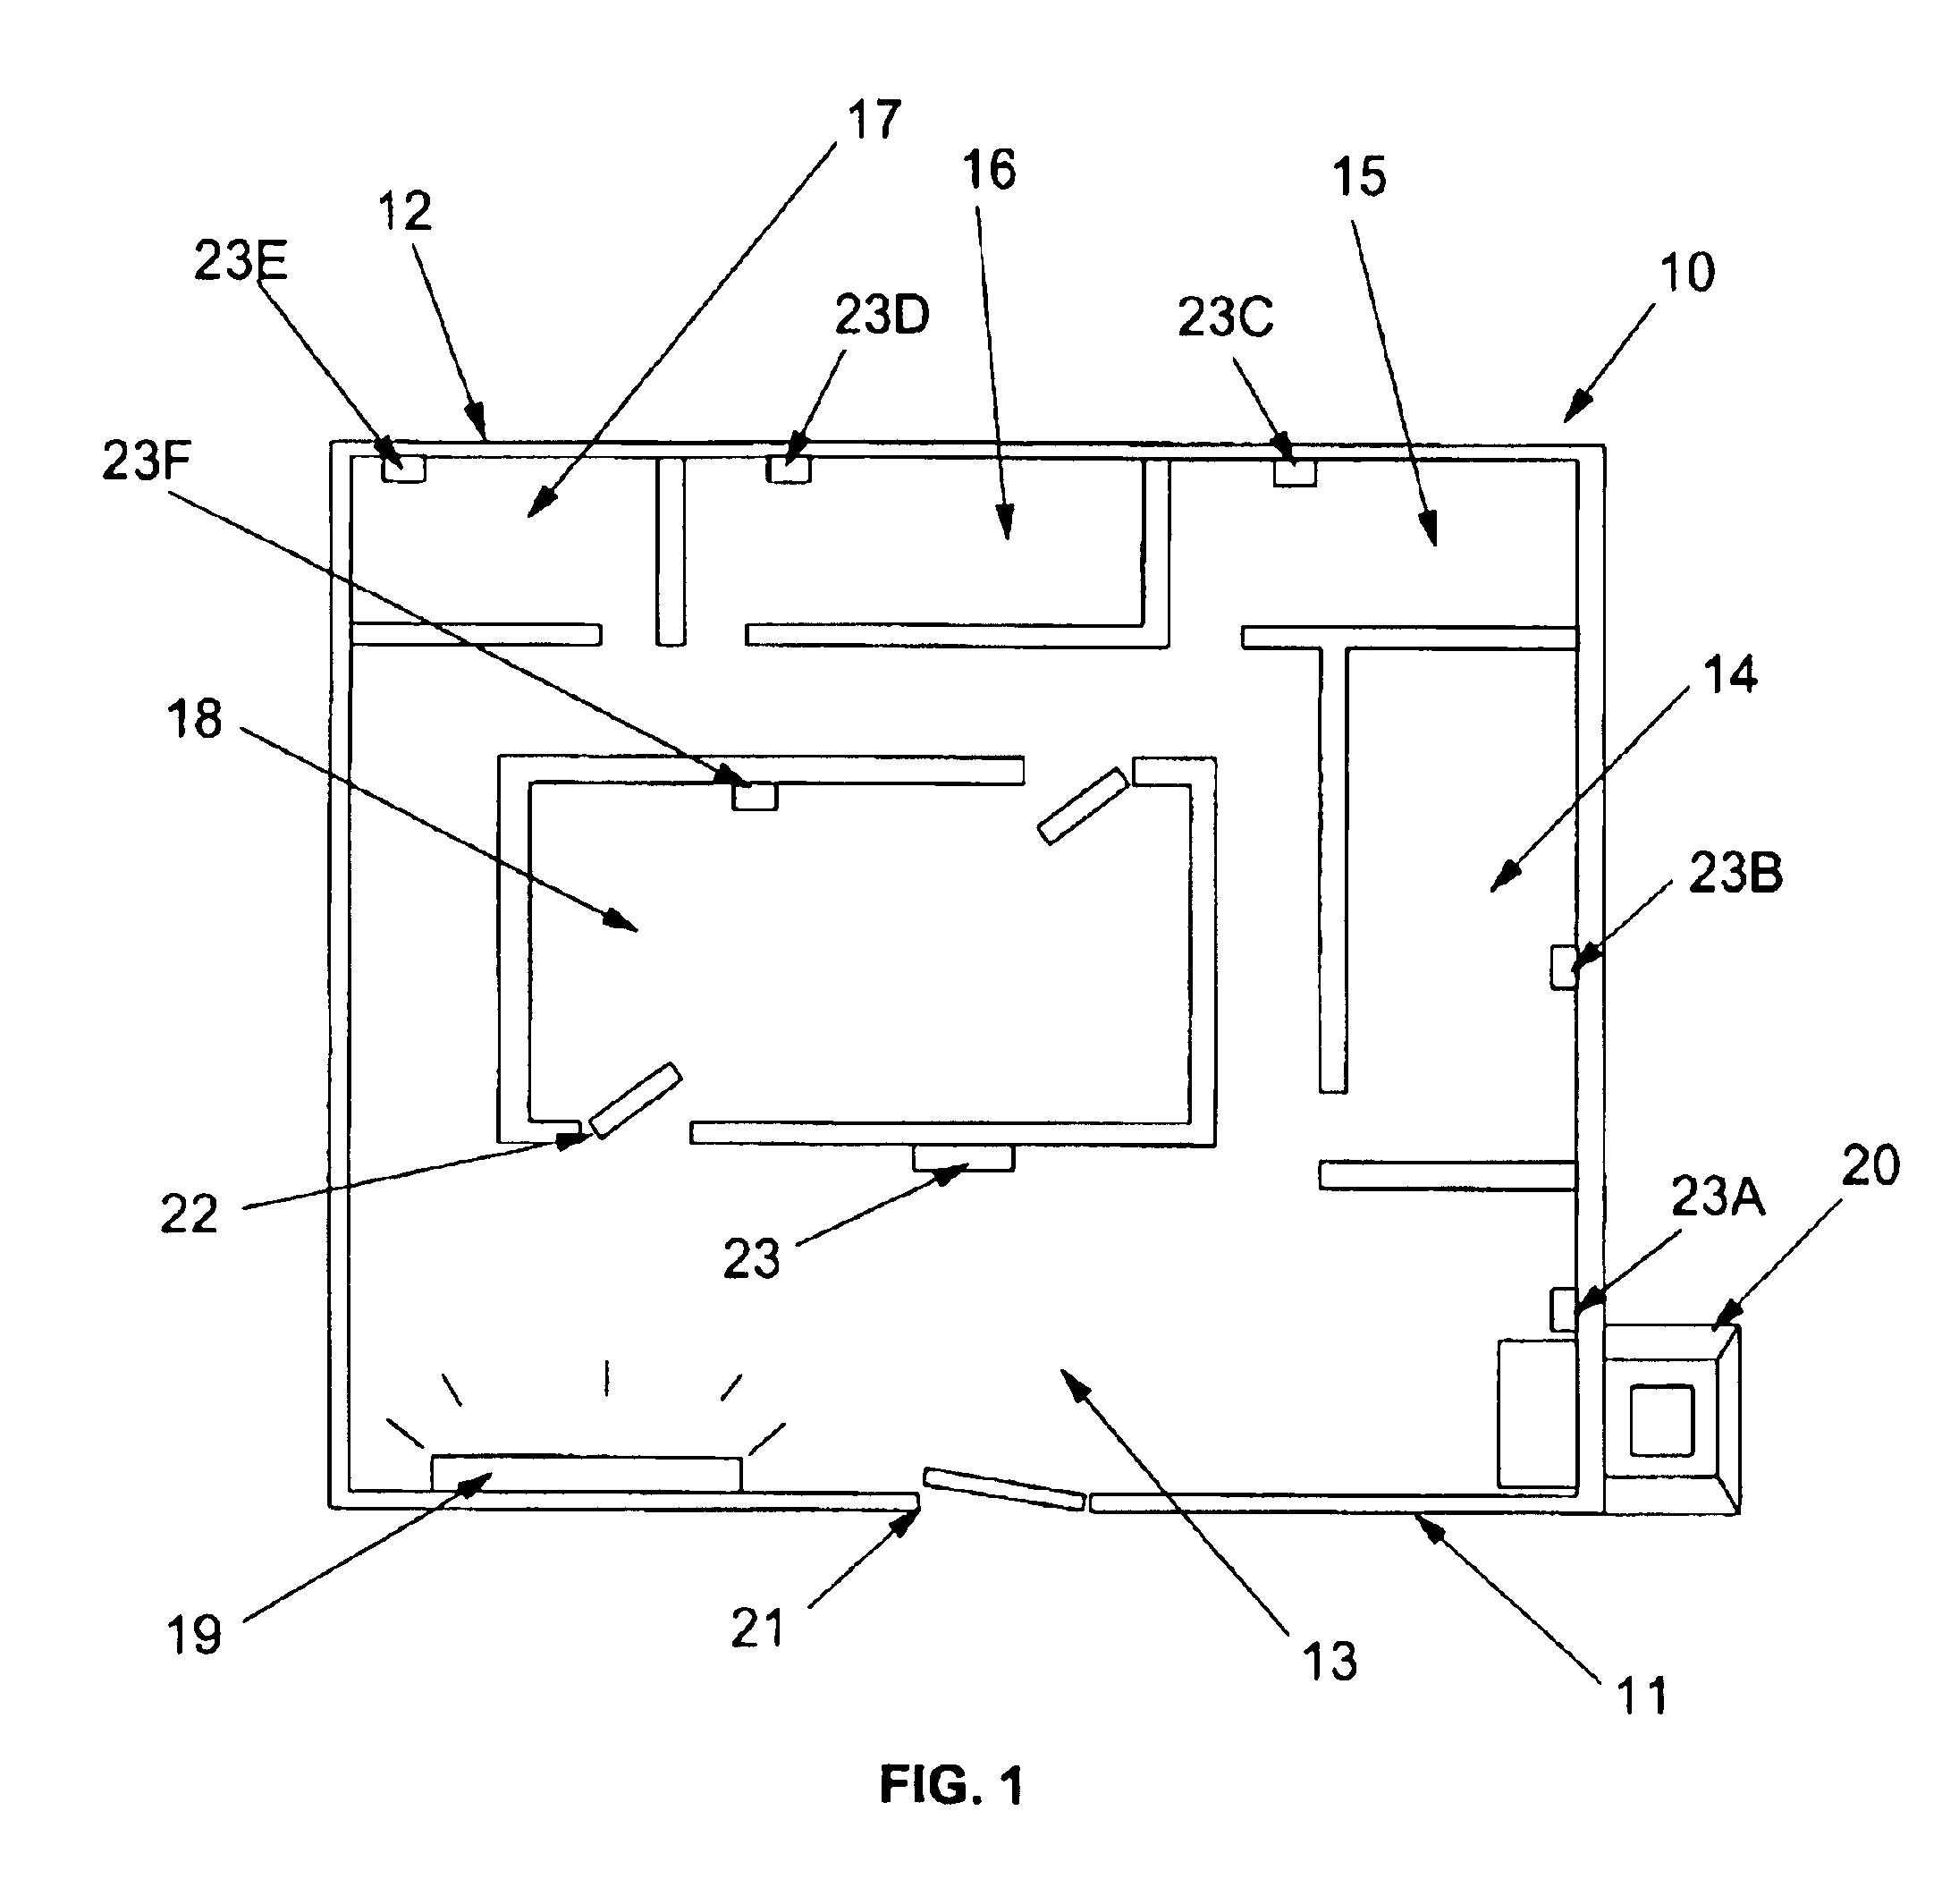 Thermostat system with remote data averaging